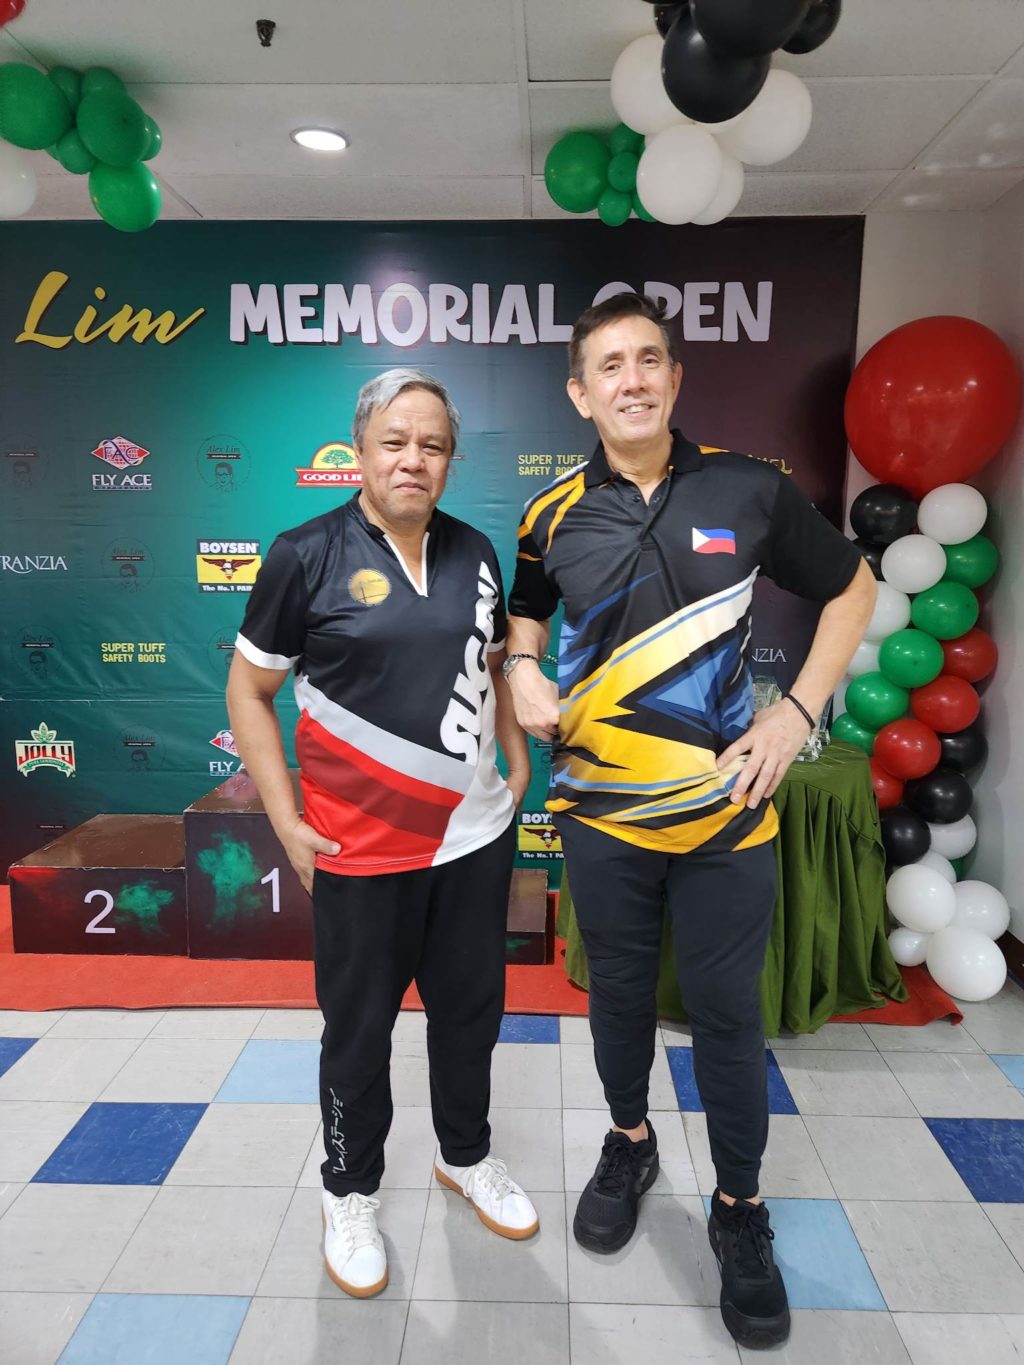 Sugbu prexy beats bowling legend Nepomuceno for 1st runnerup spot in Alex Lim Memorial Open. Edgar Alqueza (left) and Paeng Nepomuceno (right) pose for a photo during the awarding of the Alex Lim Memorial Open's masters open competition in Manila. | Contributed Photo